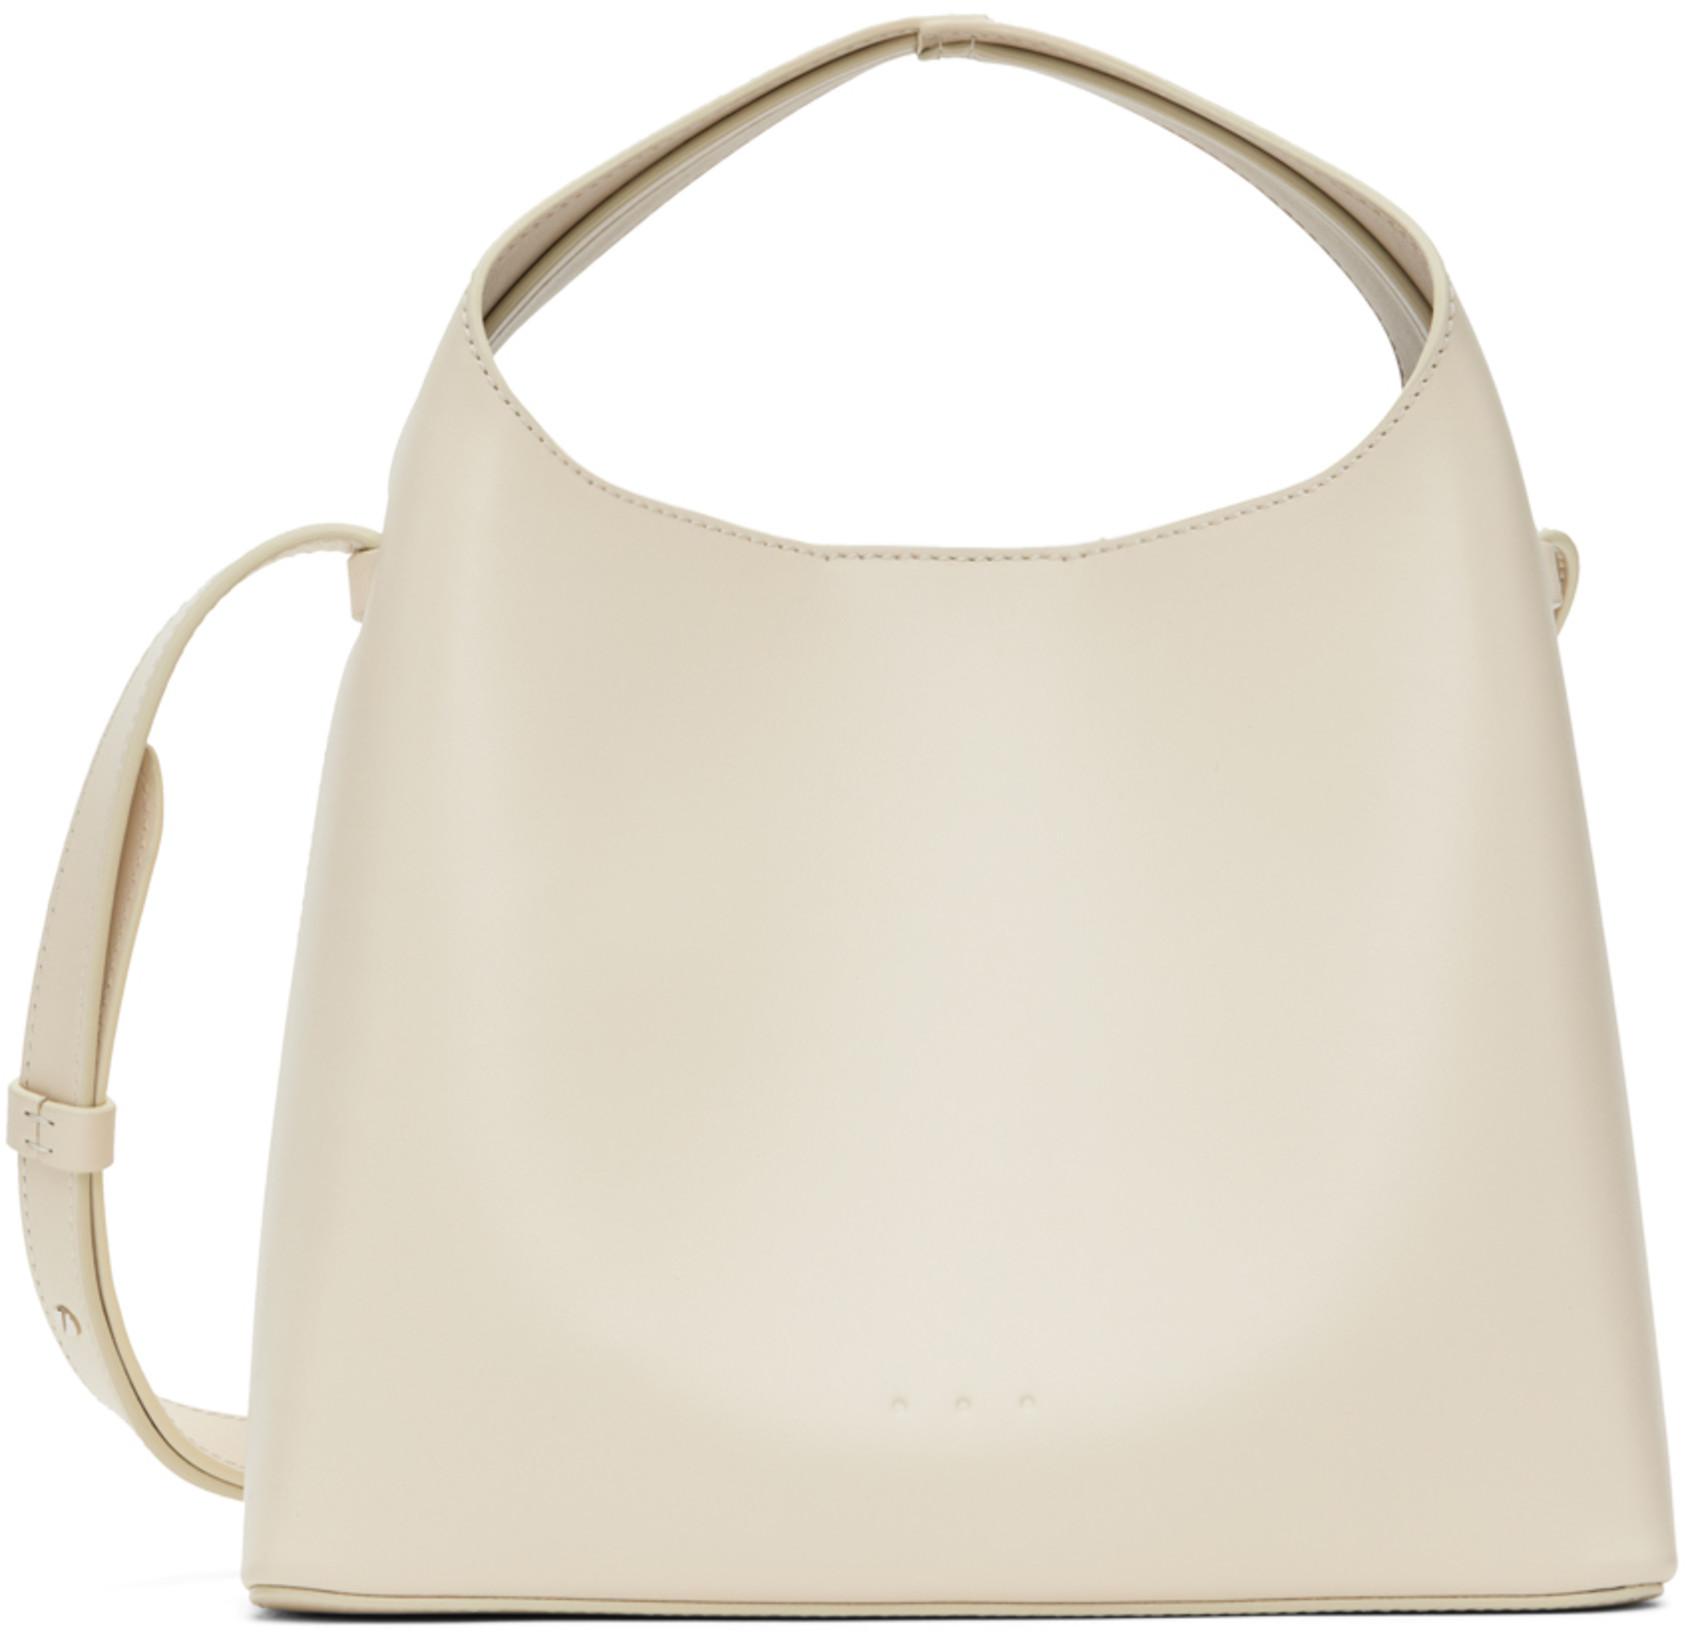 Off-White Mini Leather Shoulder Bag by AESTHER EKME